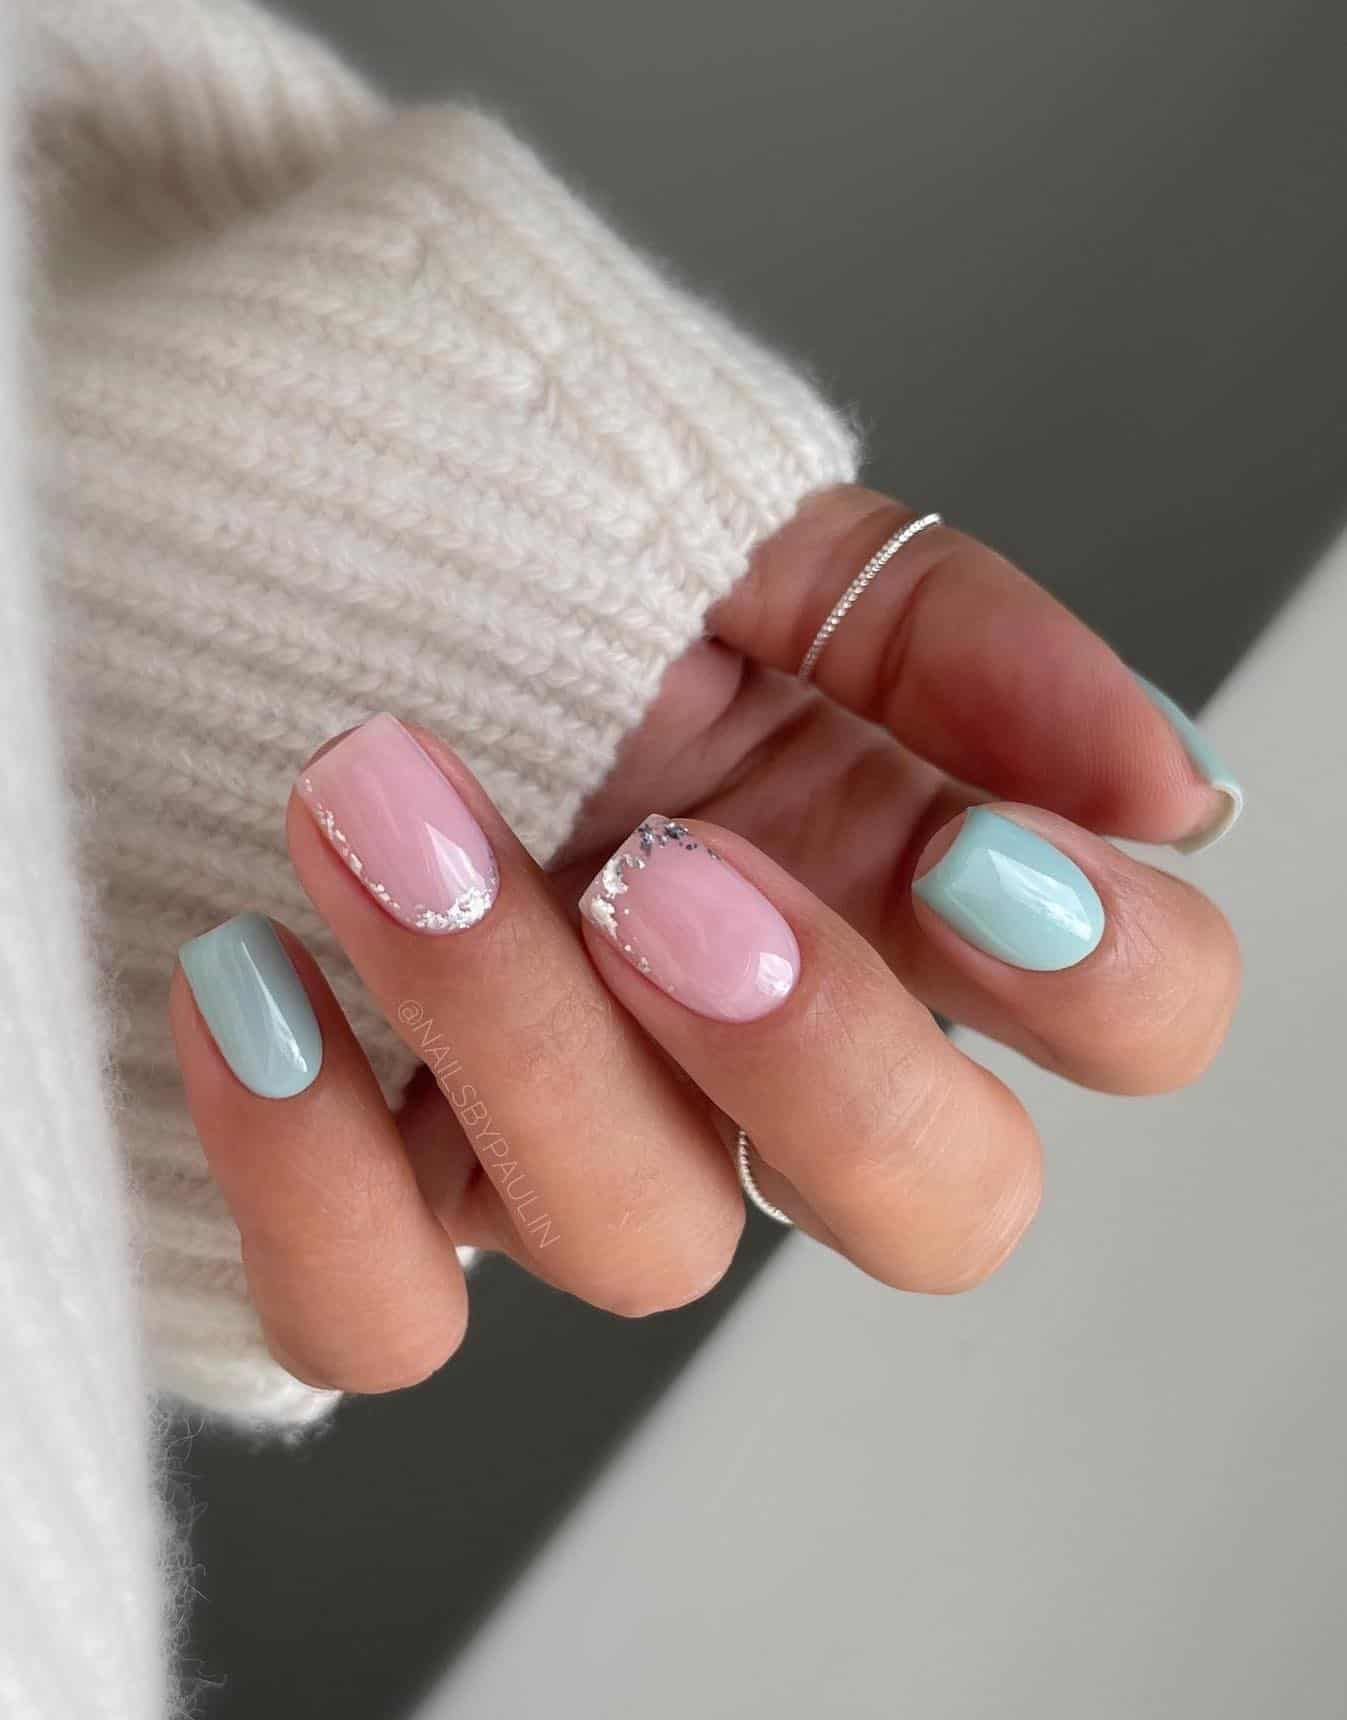 A hand with short square nails painted a soft mint green with two nude pink accent nails with silver flake details